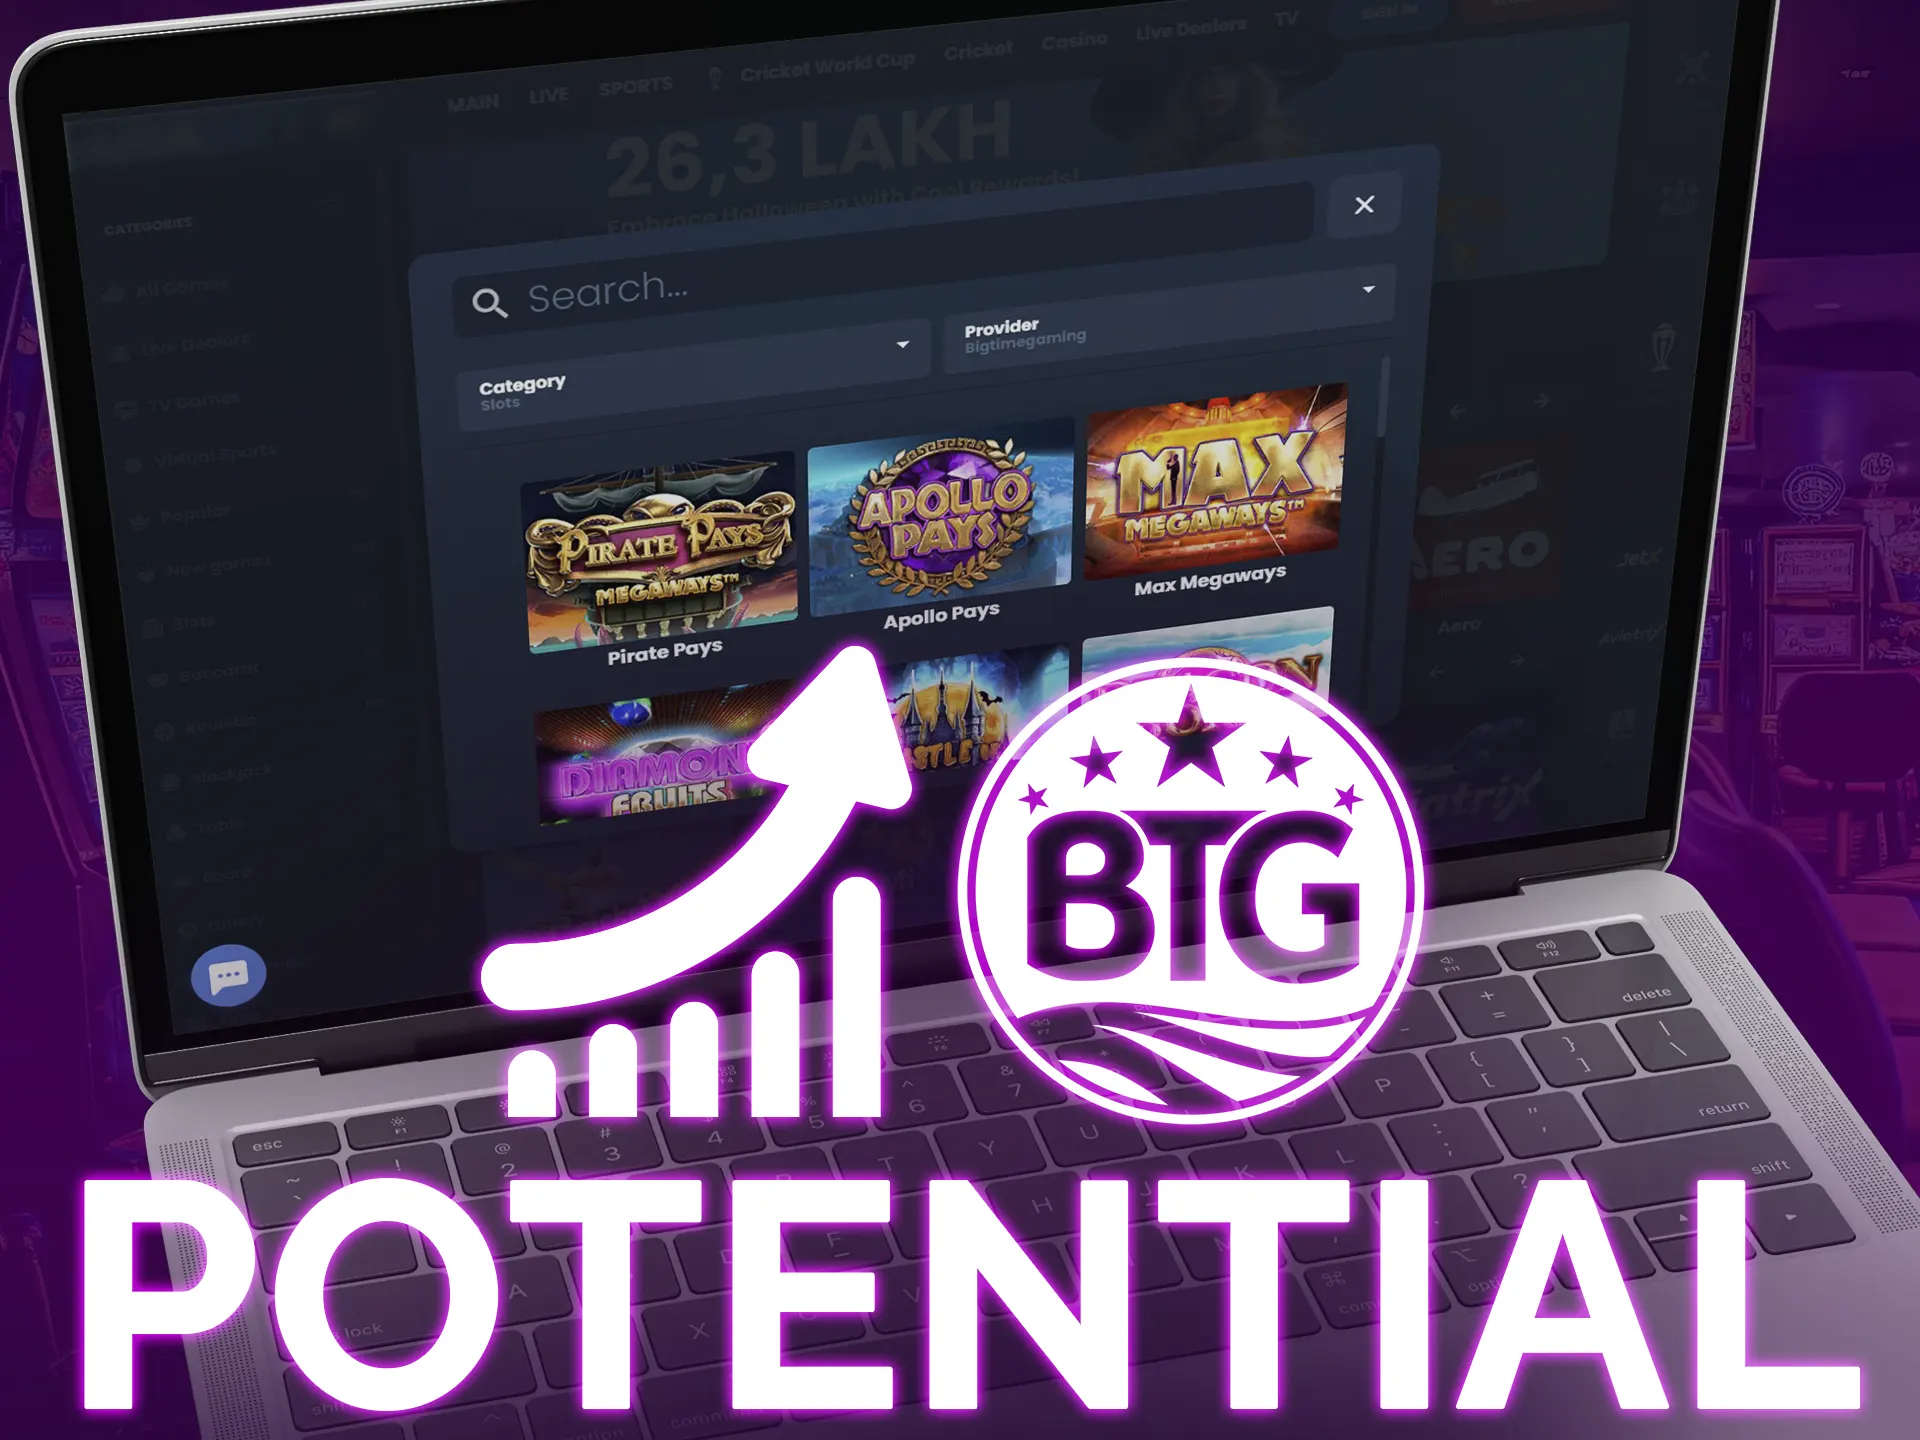 Potential determines winnings, and so Big Time Gaming games guarantee big prizes.